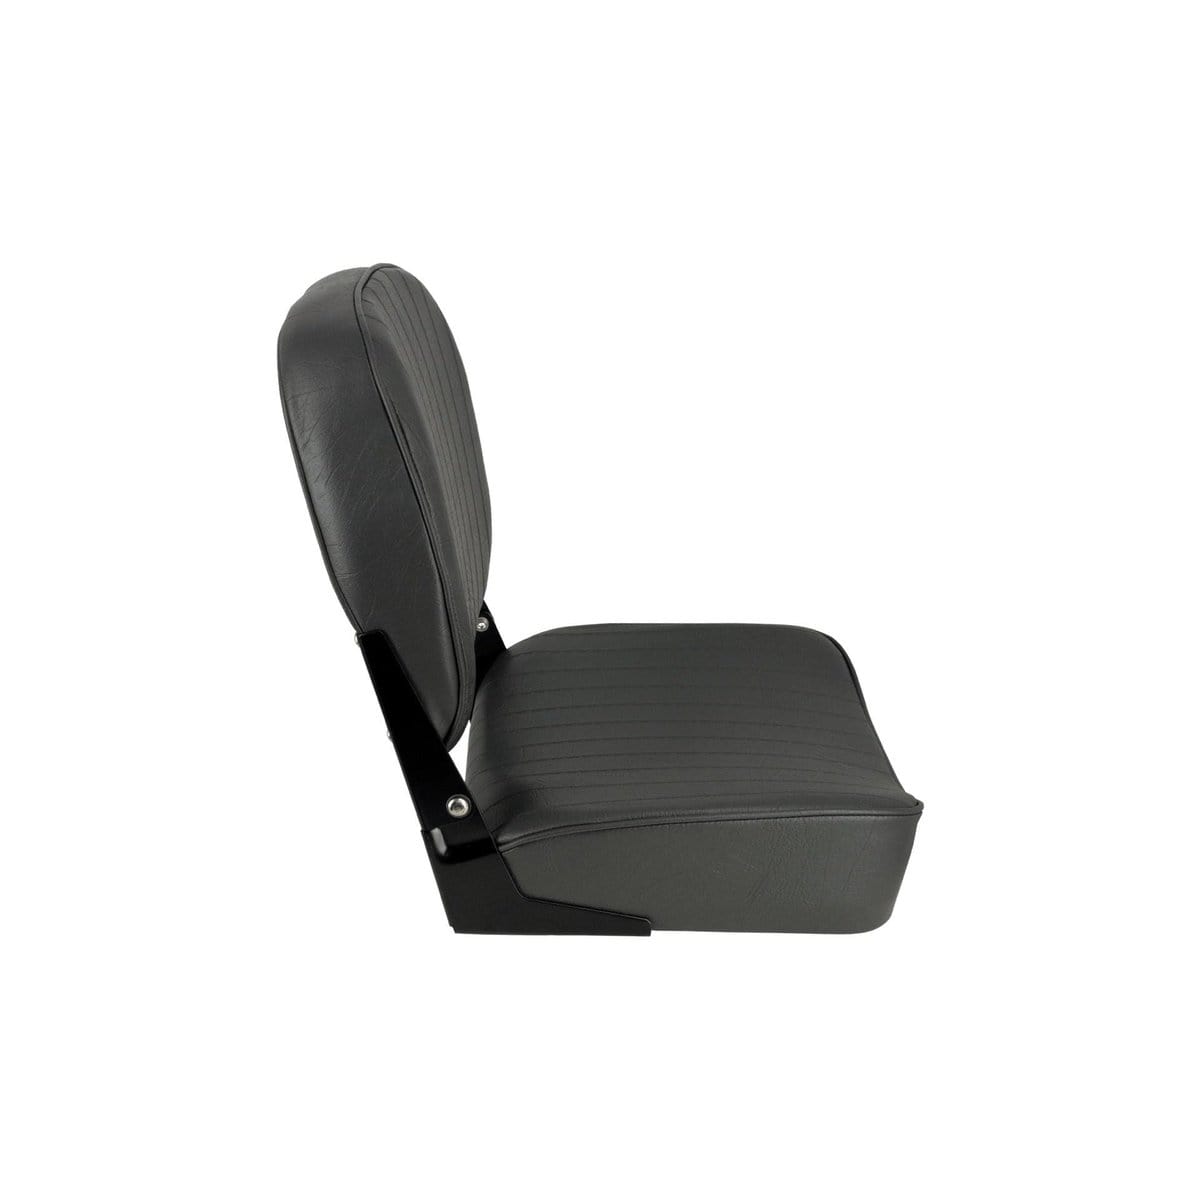 Springfield Qualifies for Free Shipping Springfield Economy Seat Charcoal #1040624